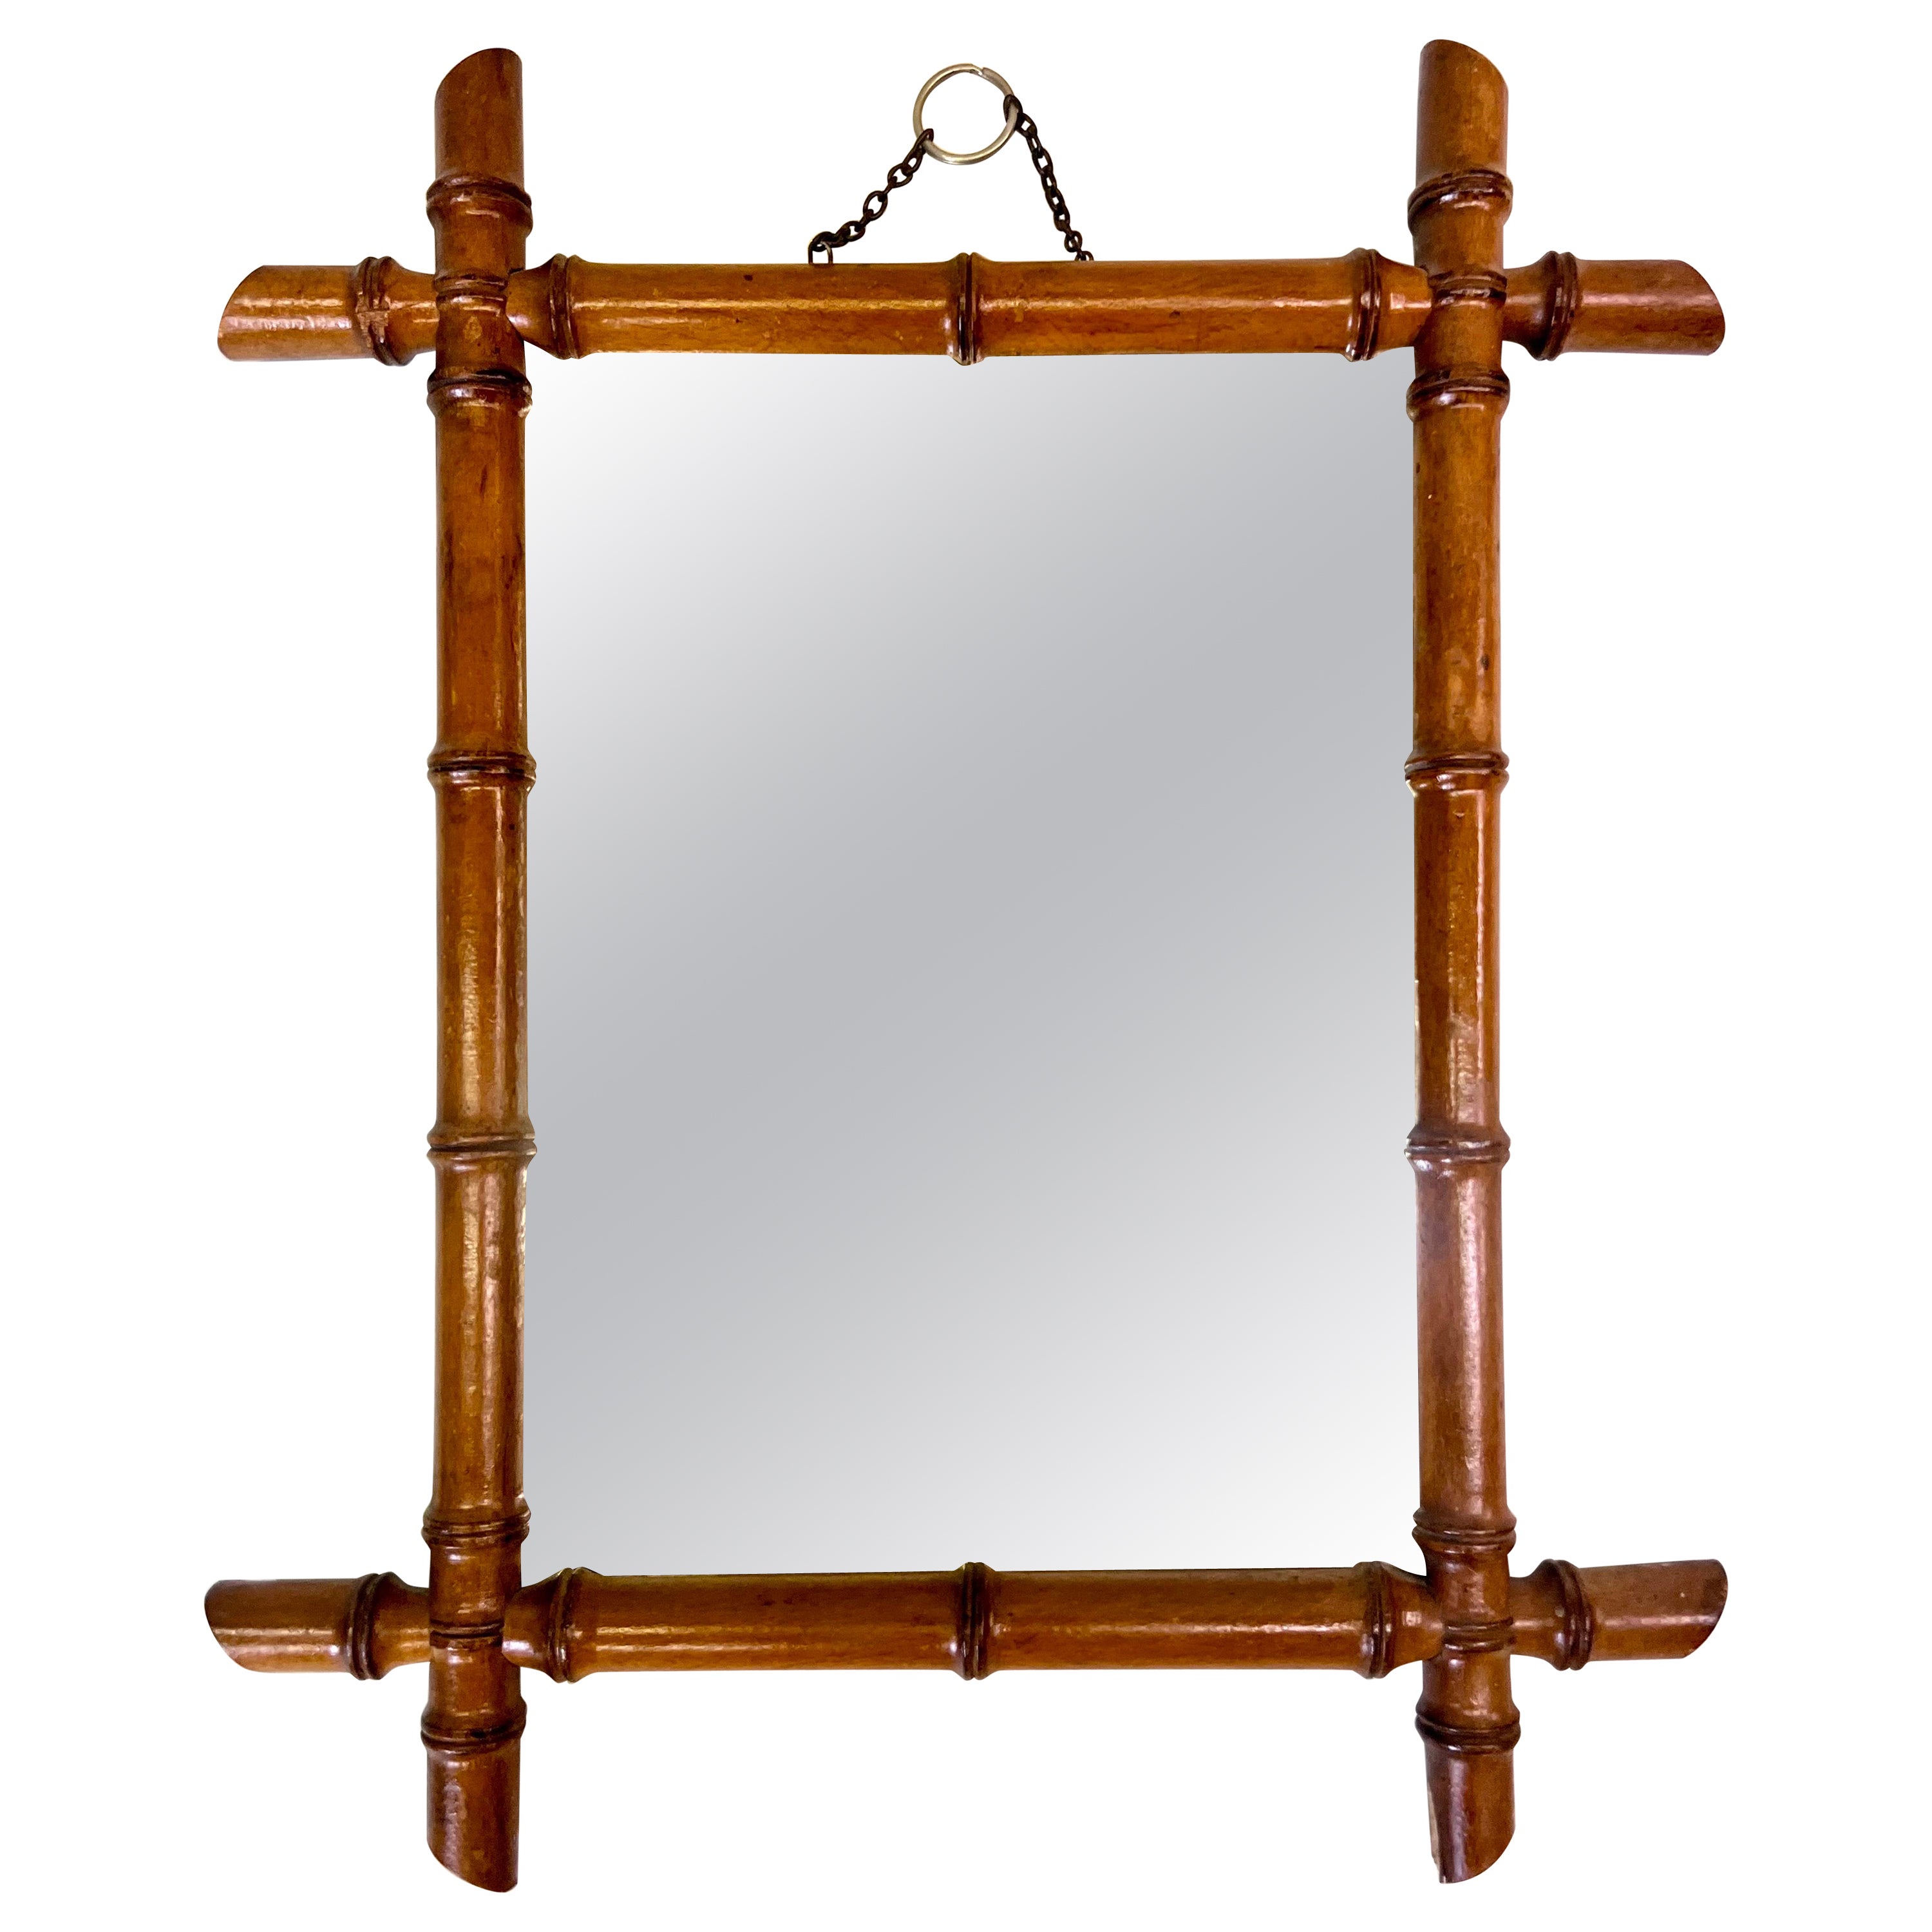 French Mid-century Modern Neoclassical Faux Bamboo Wall Mirror, style JM Frank For Sale